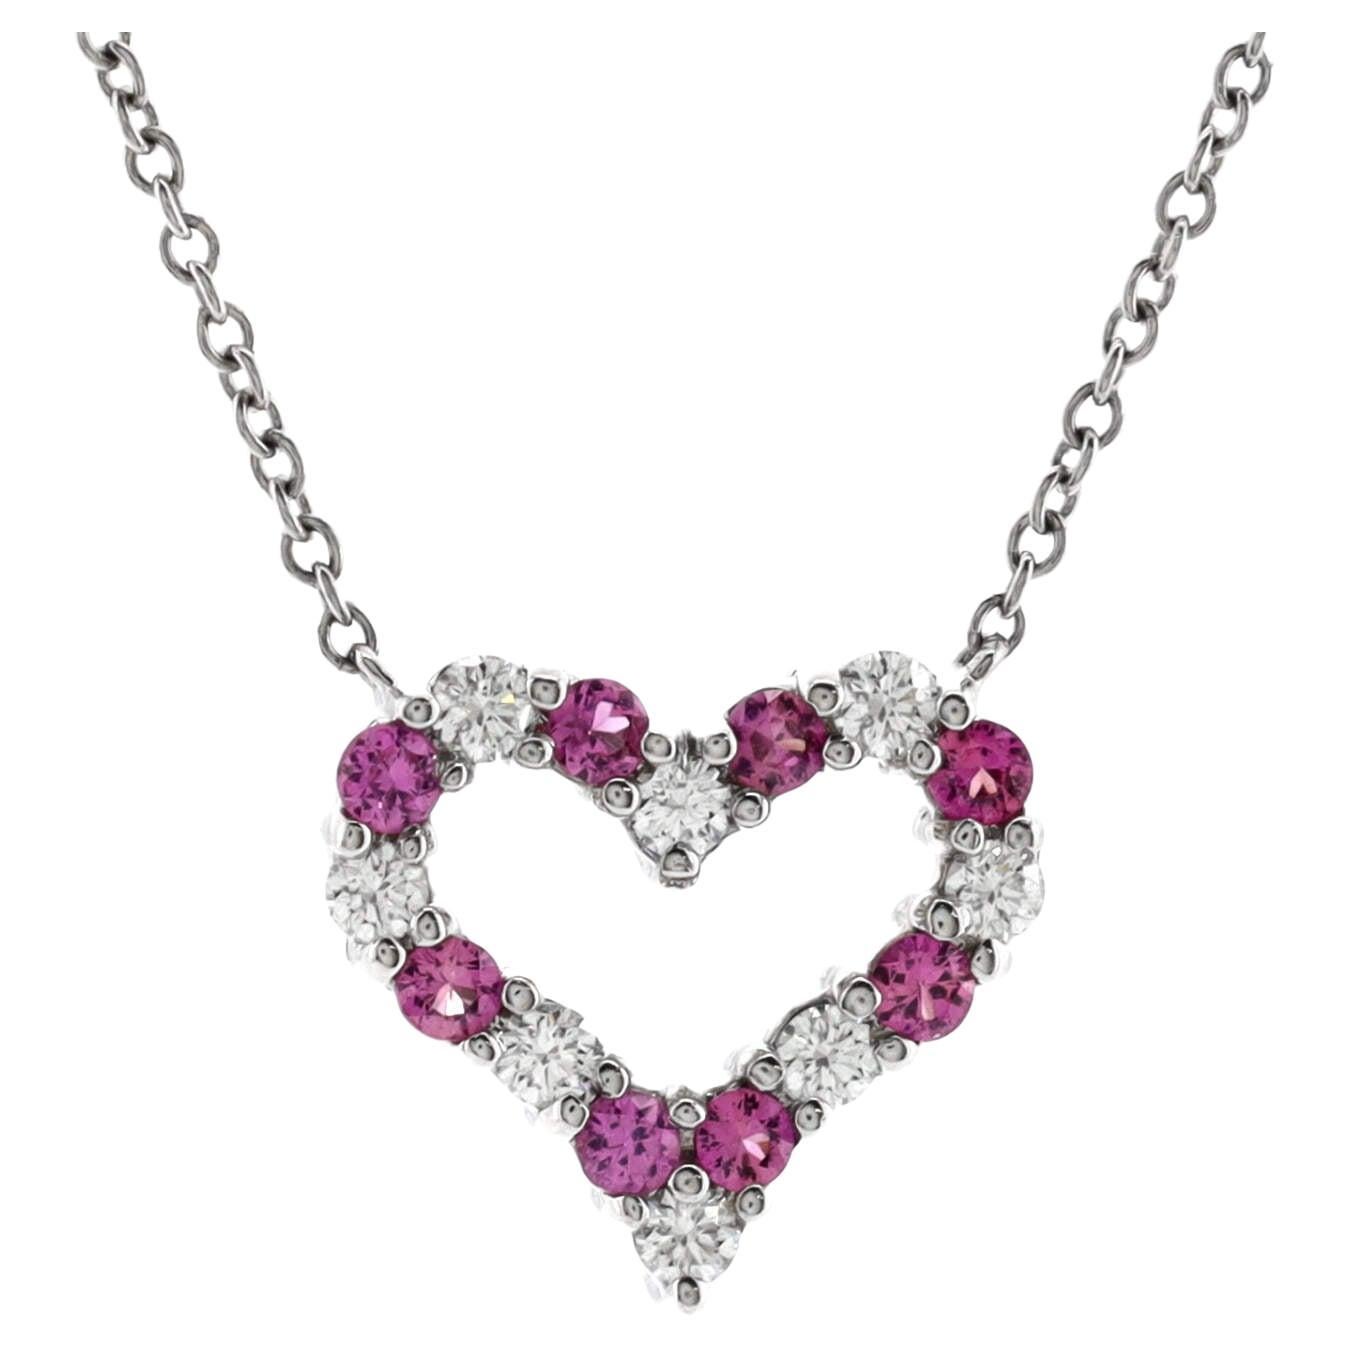 Tiffany & Co. Sentimental Heart Pendant Necklace Platinum with Diamonds and Pink